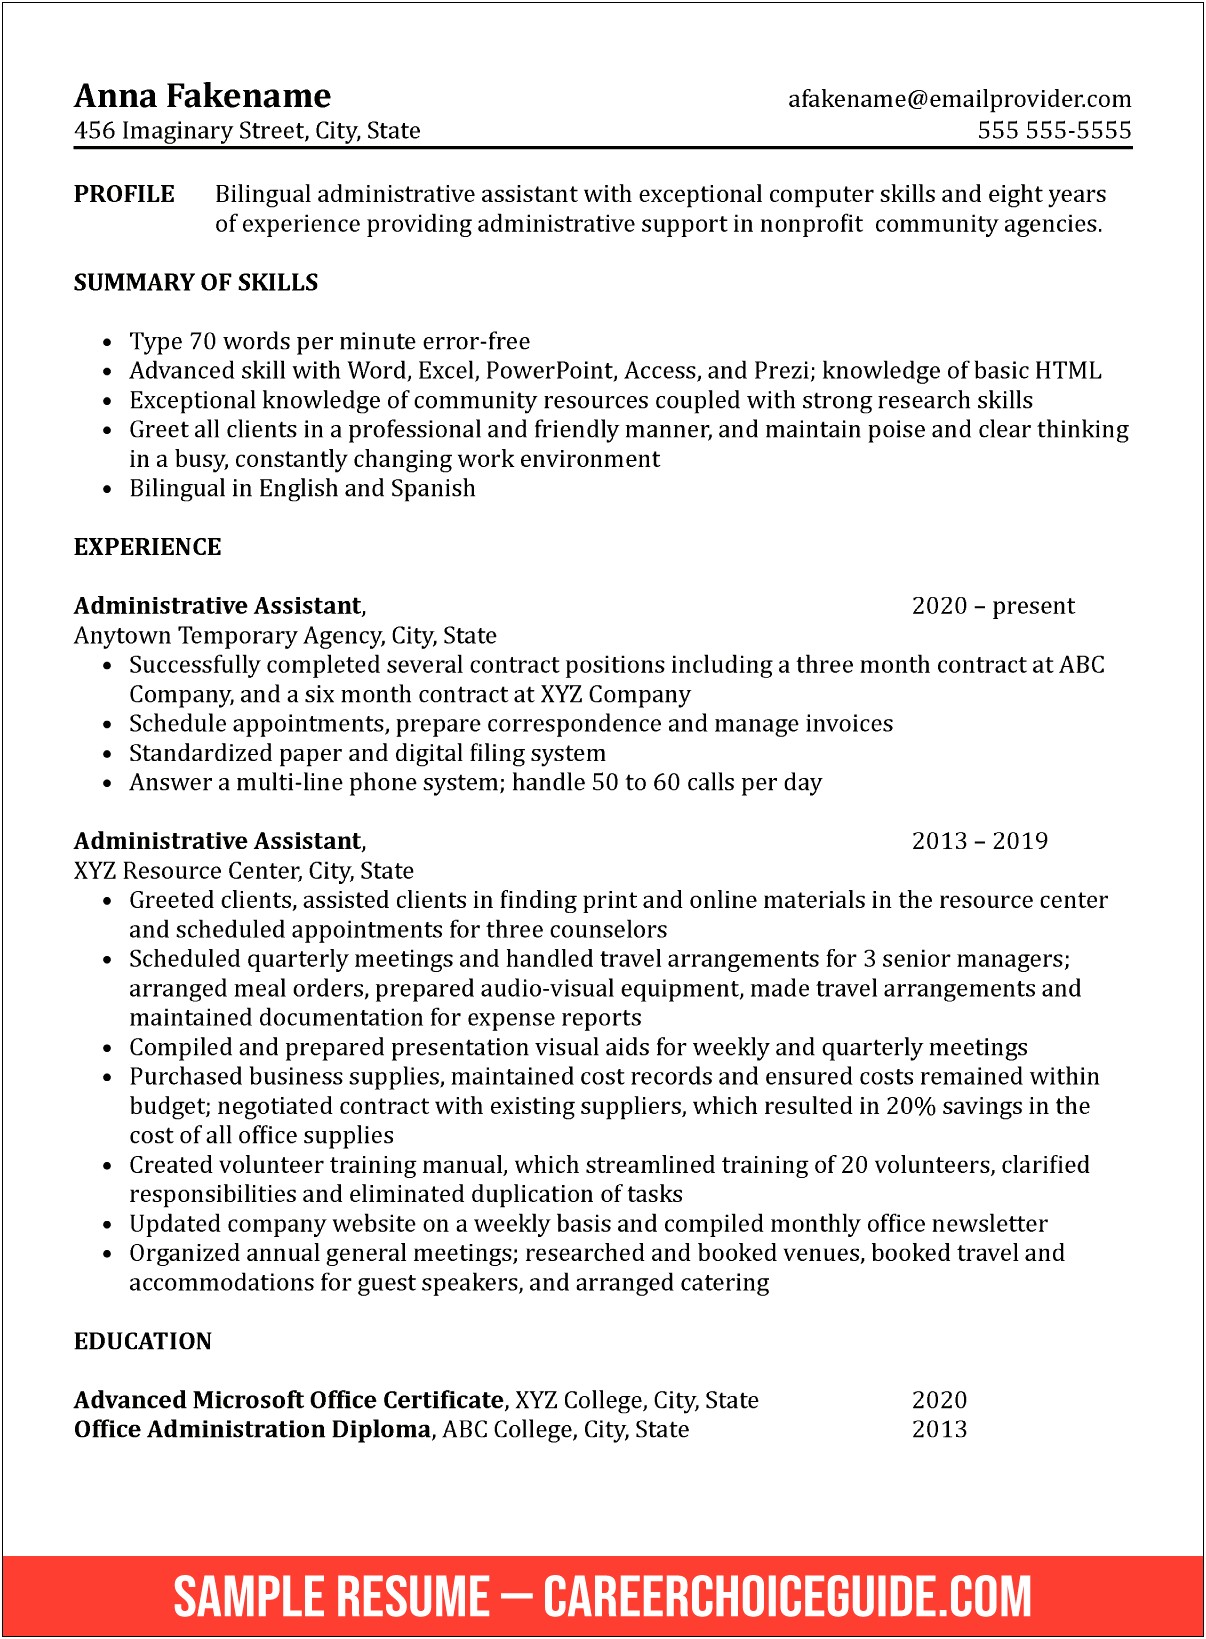 Professional Resume For Admin Jobs